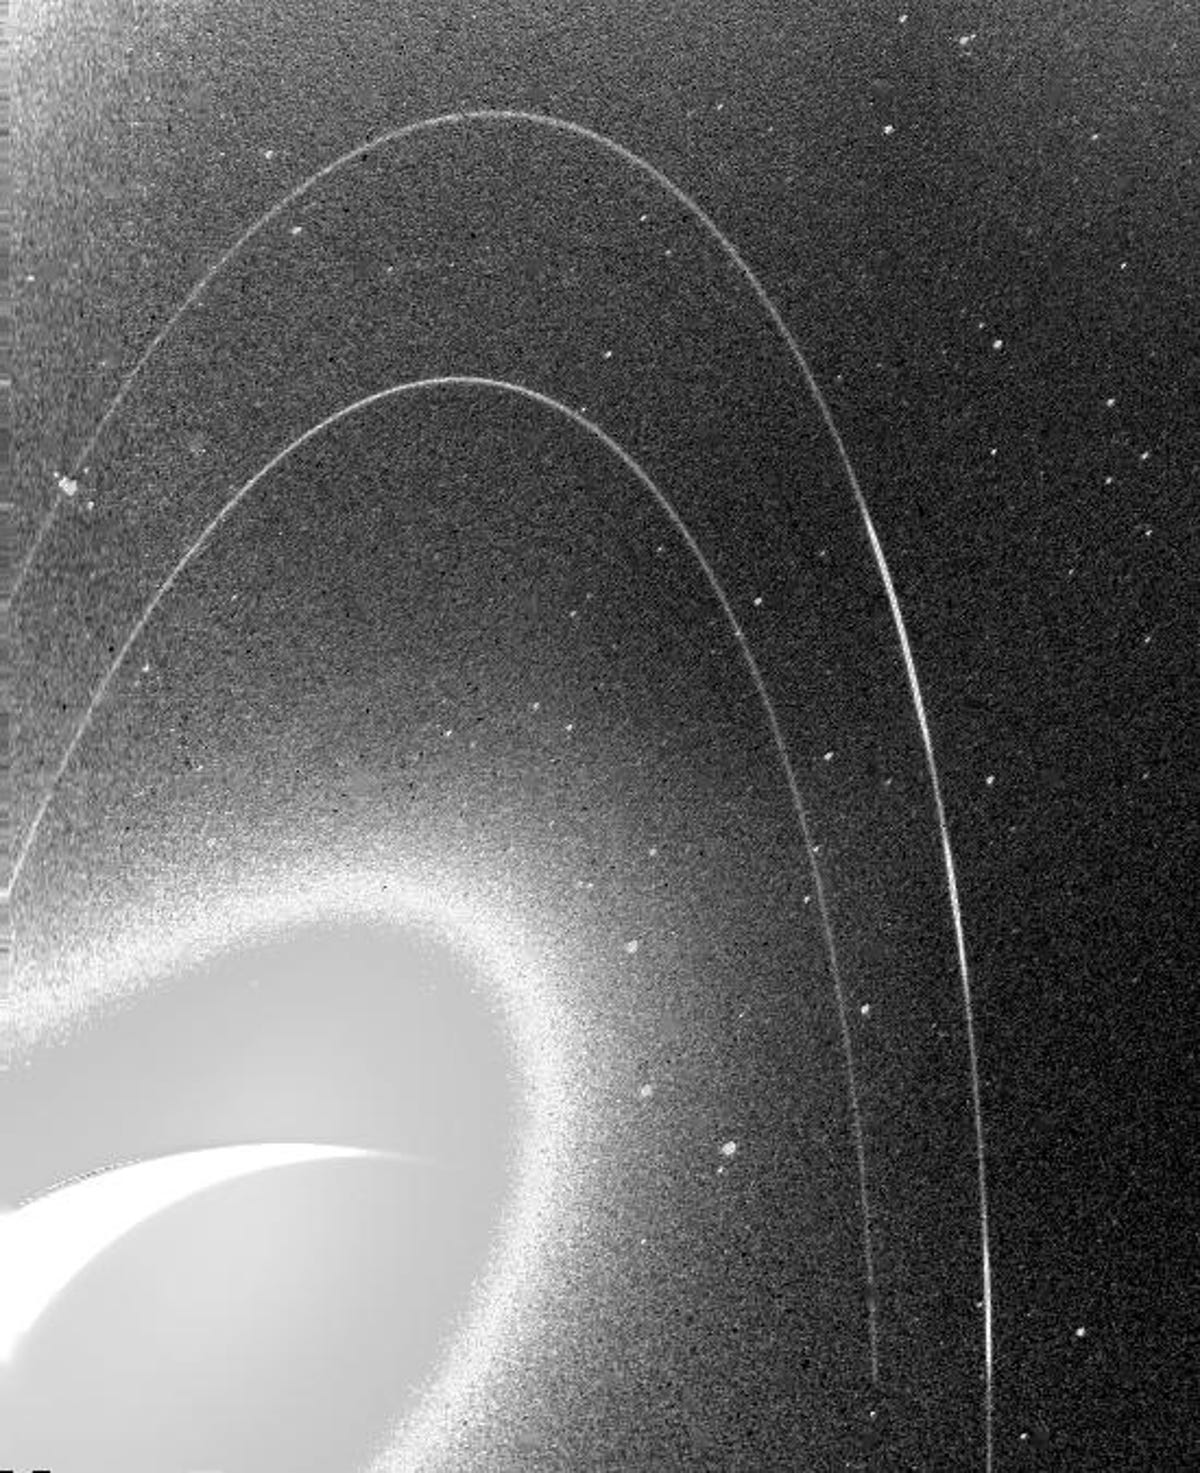 The grainy black and white image shows the faint rings of Neptune.